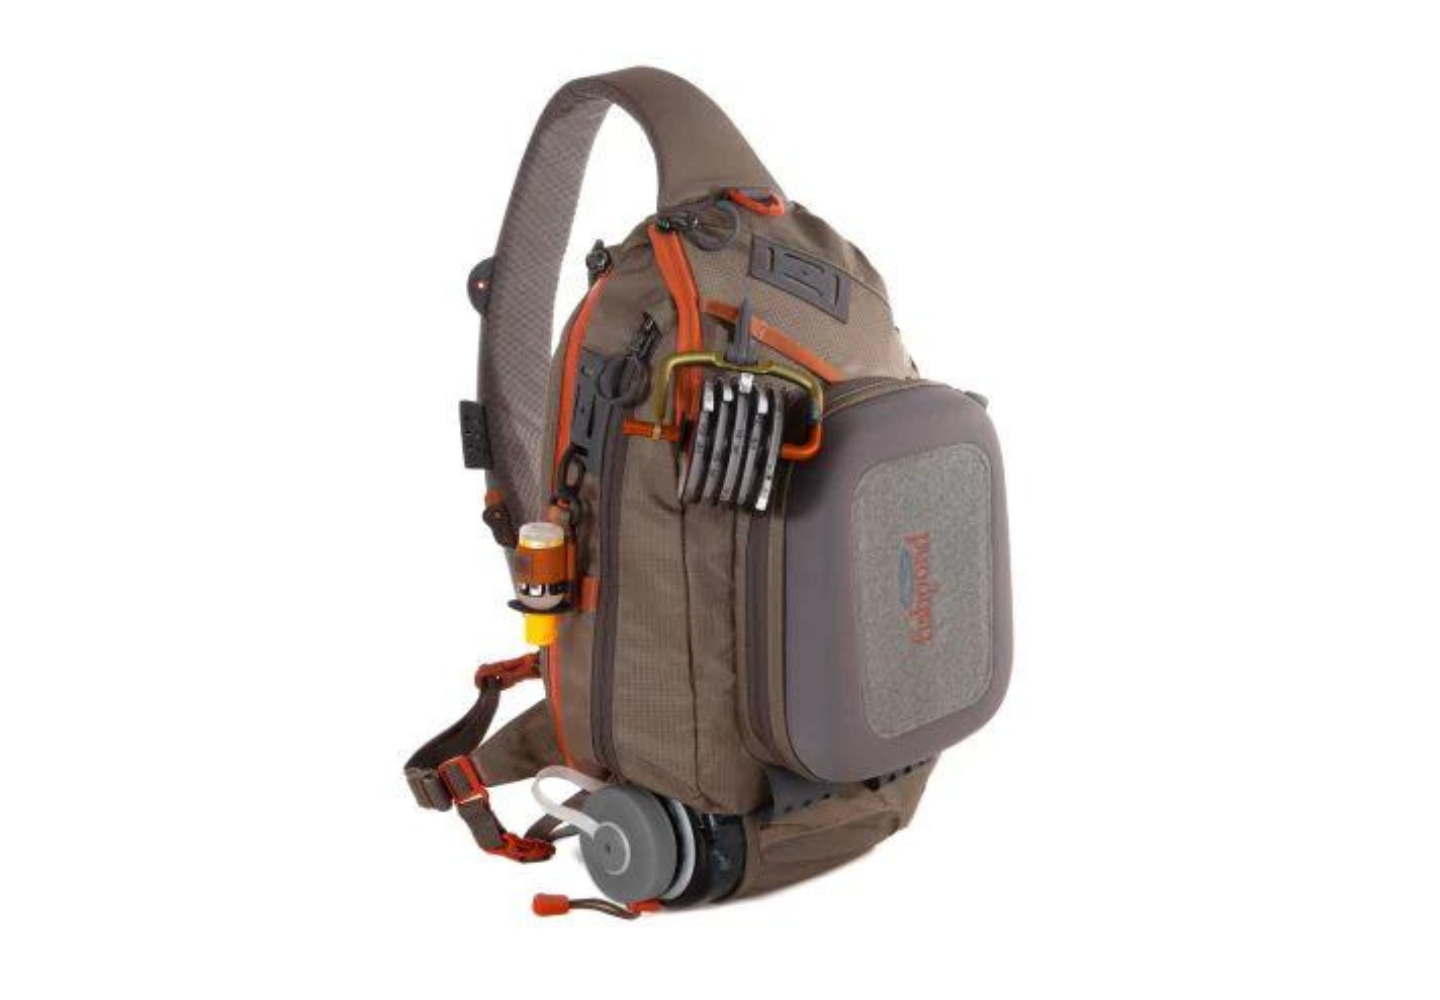 A fly fishing sling pack from Fishpond